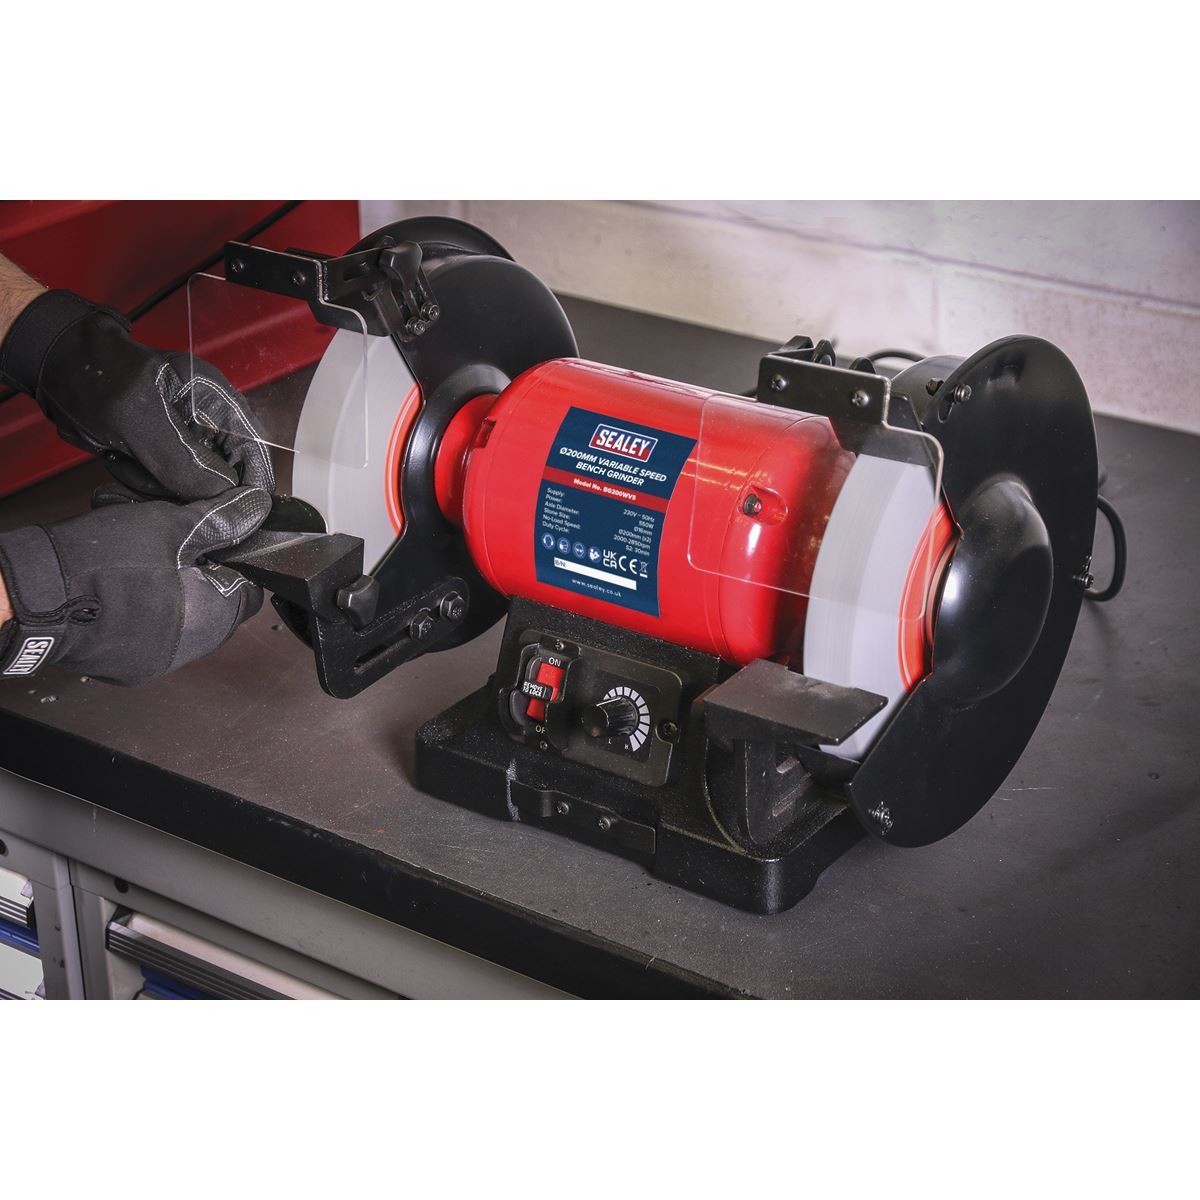 Sealey Bench Grinder 200mm Variable Speed BG200WVS